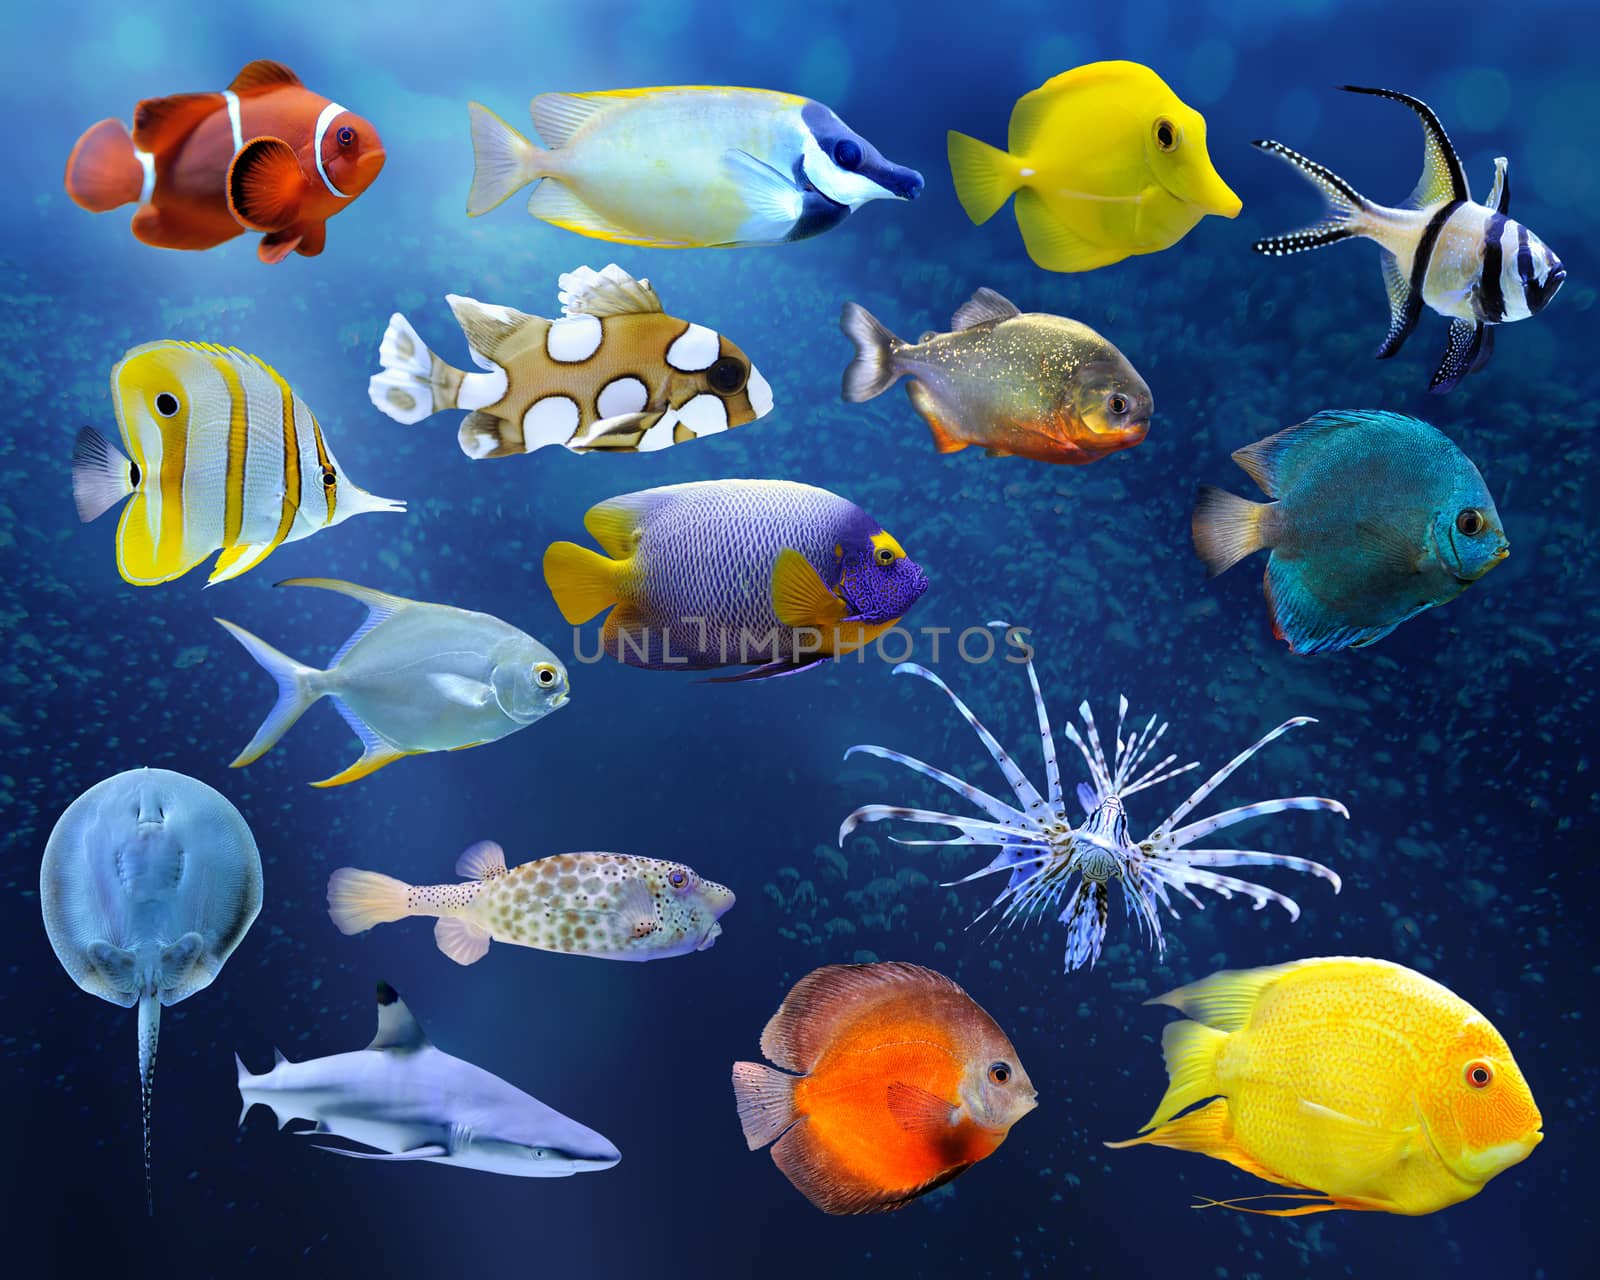 Great collection of a tropical fish by byrdyak